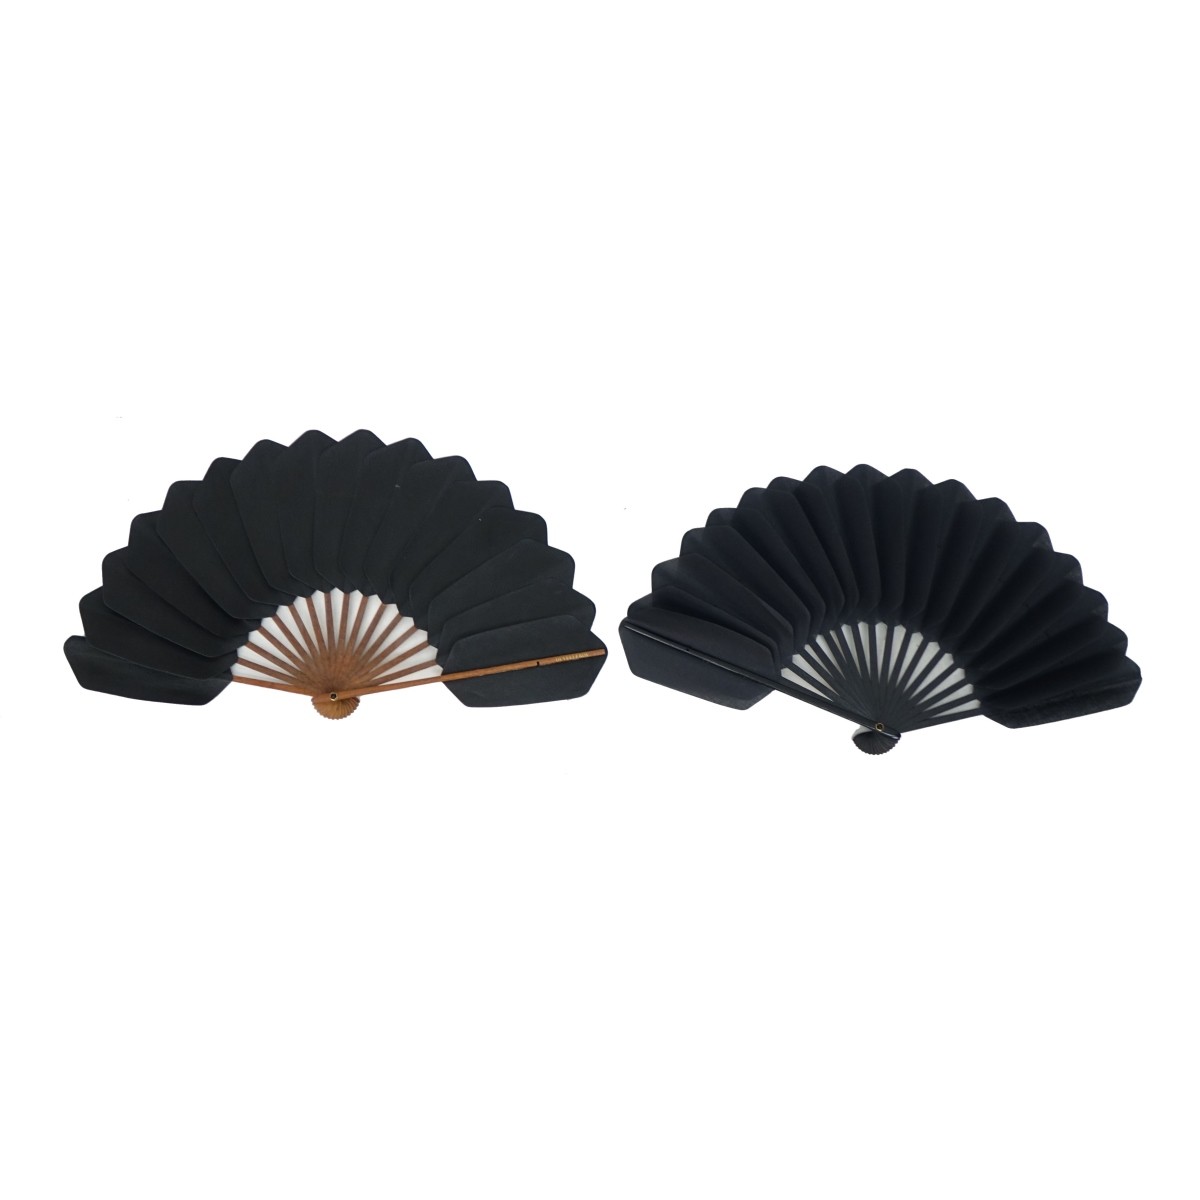 (2) Duvelleroy French Hand Fans